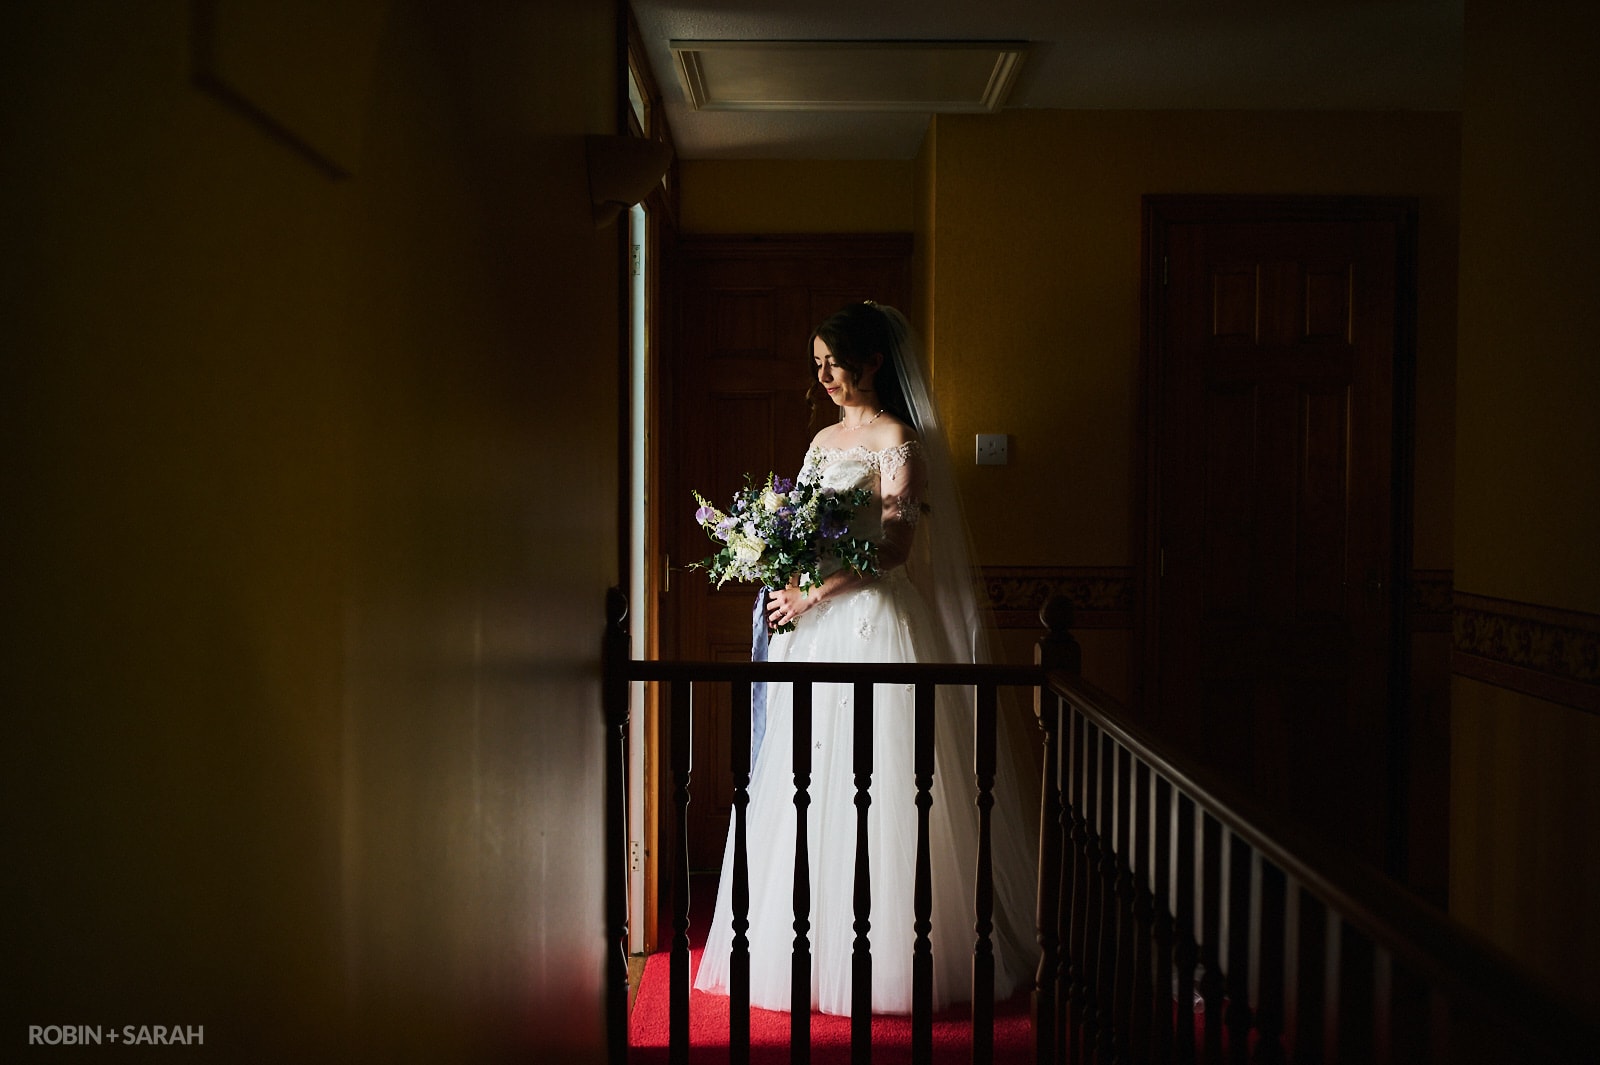 Bride ready for wedding standing in dark hallway with strong directional light